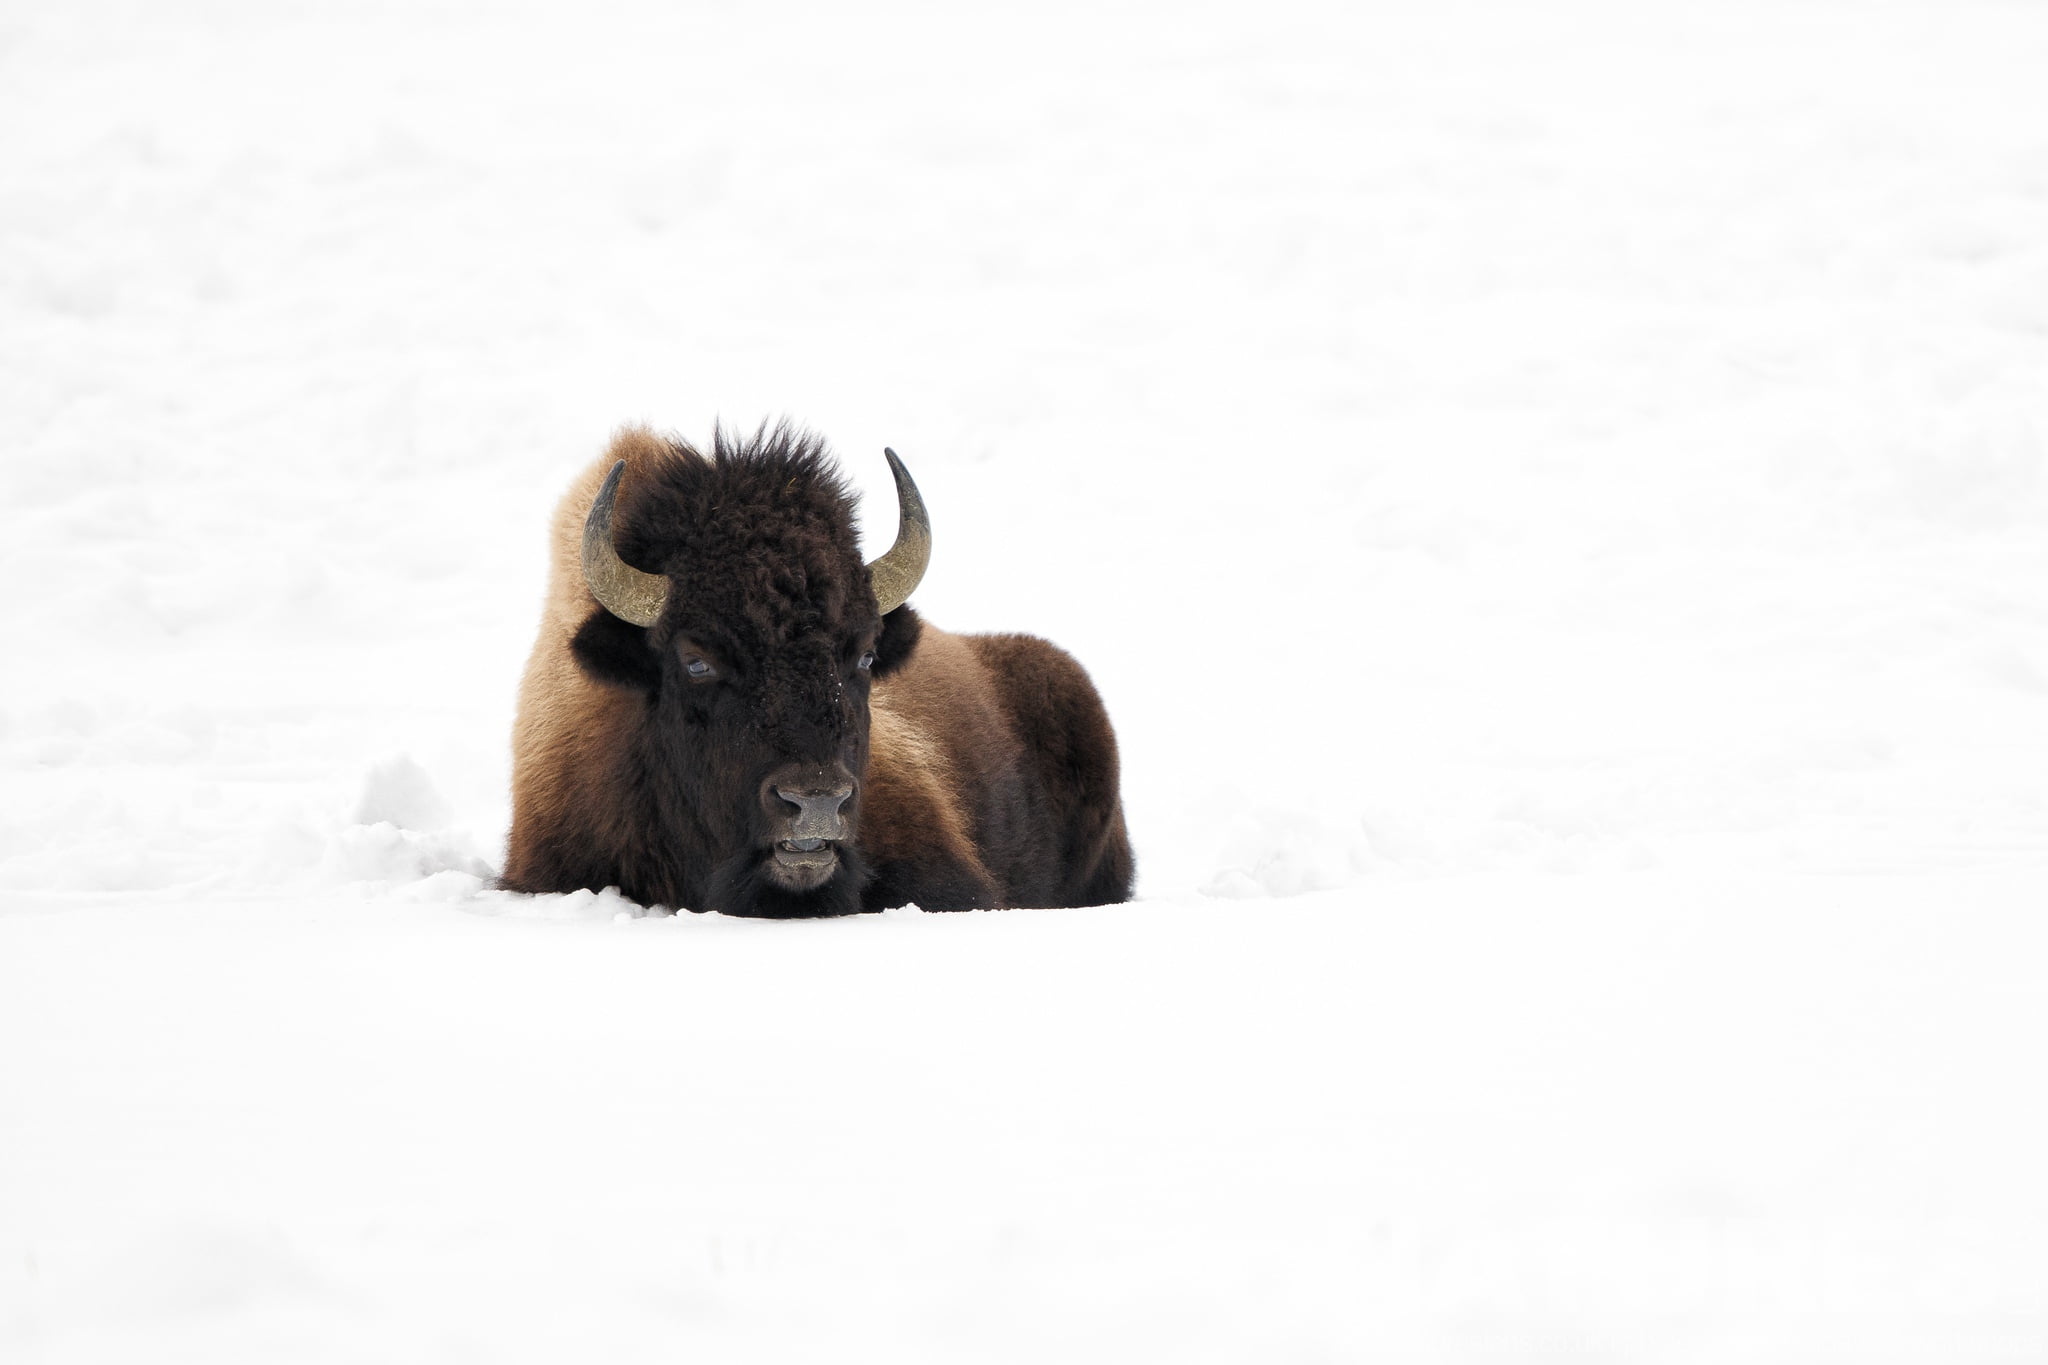 One Of Yellowstone'S Bison Resting In The Snow Typical Of The Type Of Image That You Will Capture During The Wildlife Of Yellowstone In Winter Photography Holiday